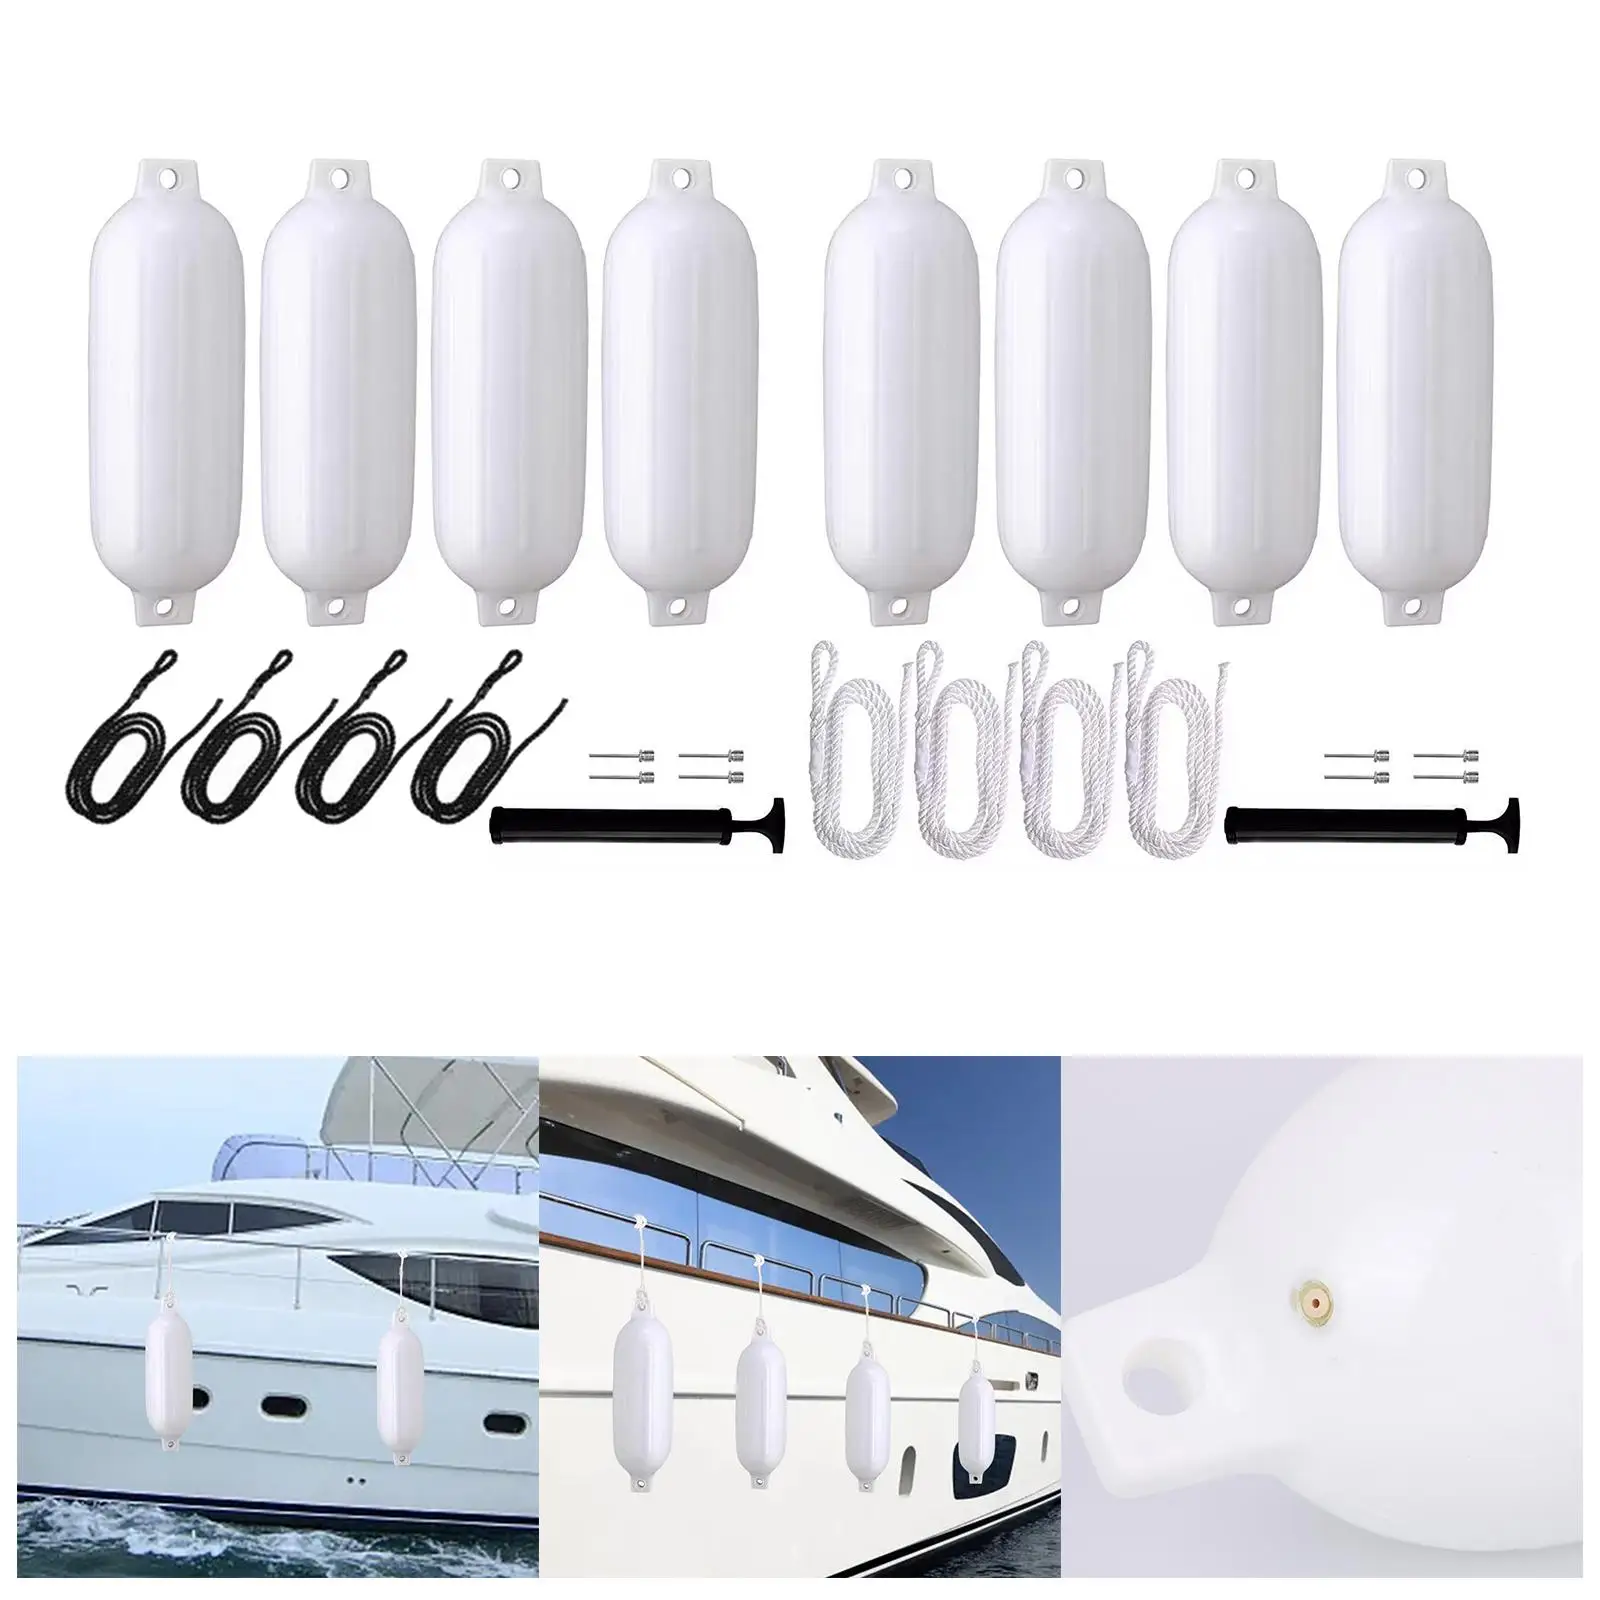 4x Boat Fenders Bumpers Marina Dock Protector Boat Bumpers for Sport Boats Sailboats Bass Boats Protection Fishing Boats